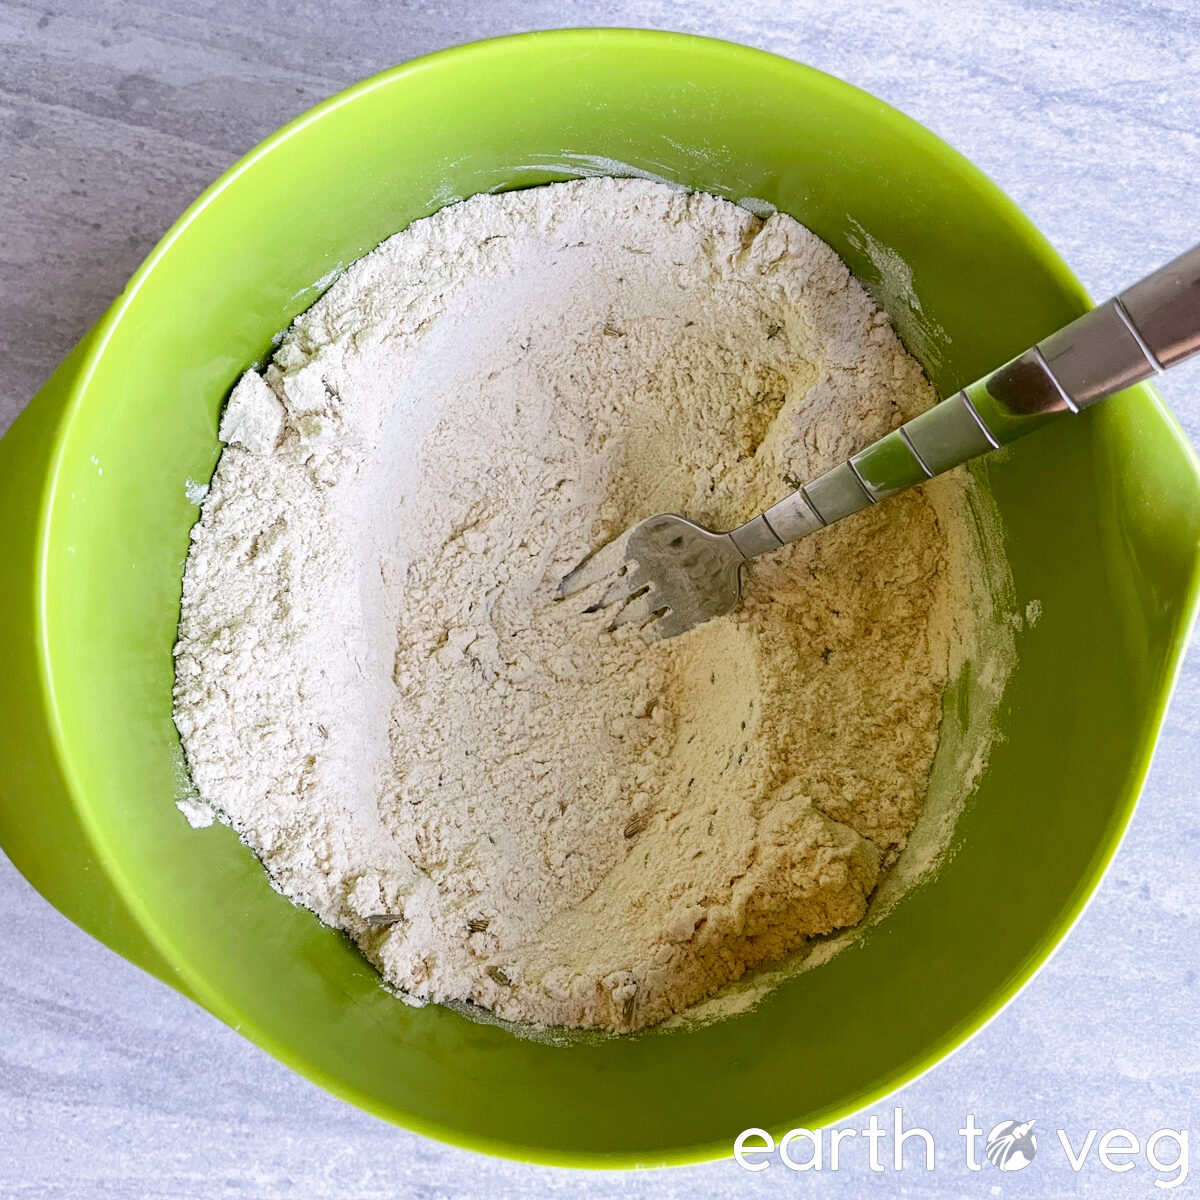 Dry ingredients for Irish soda bread are mixed together with a metal fork in a green bowl.